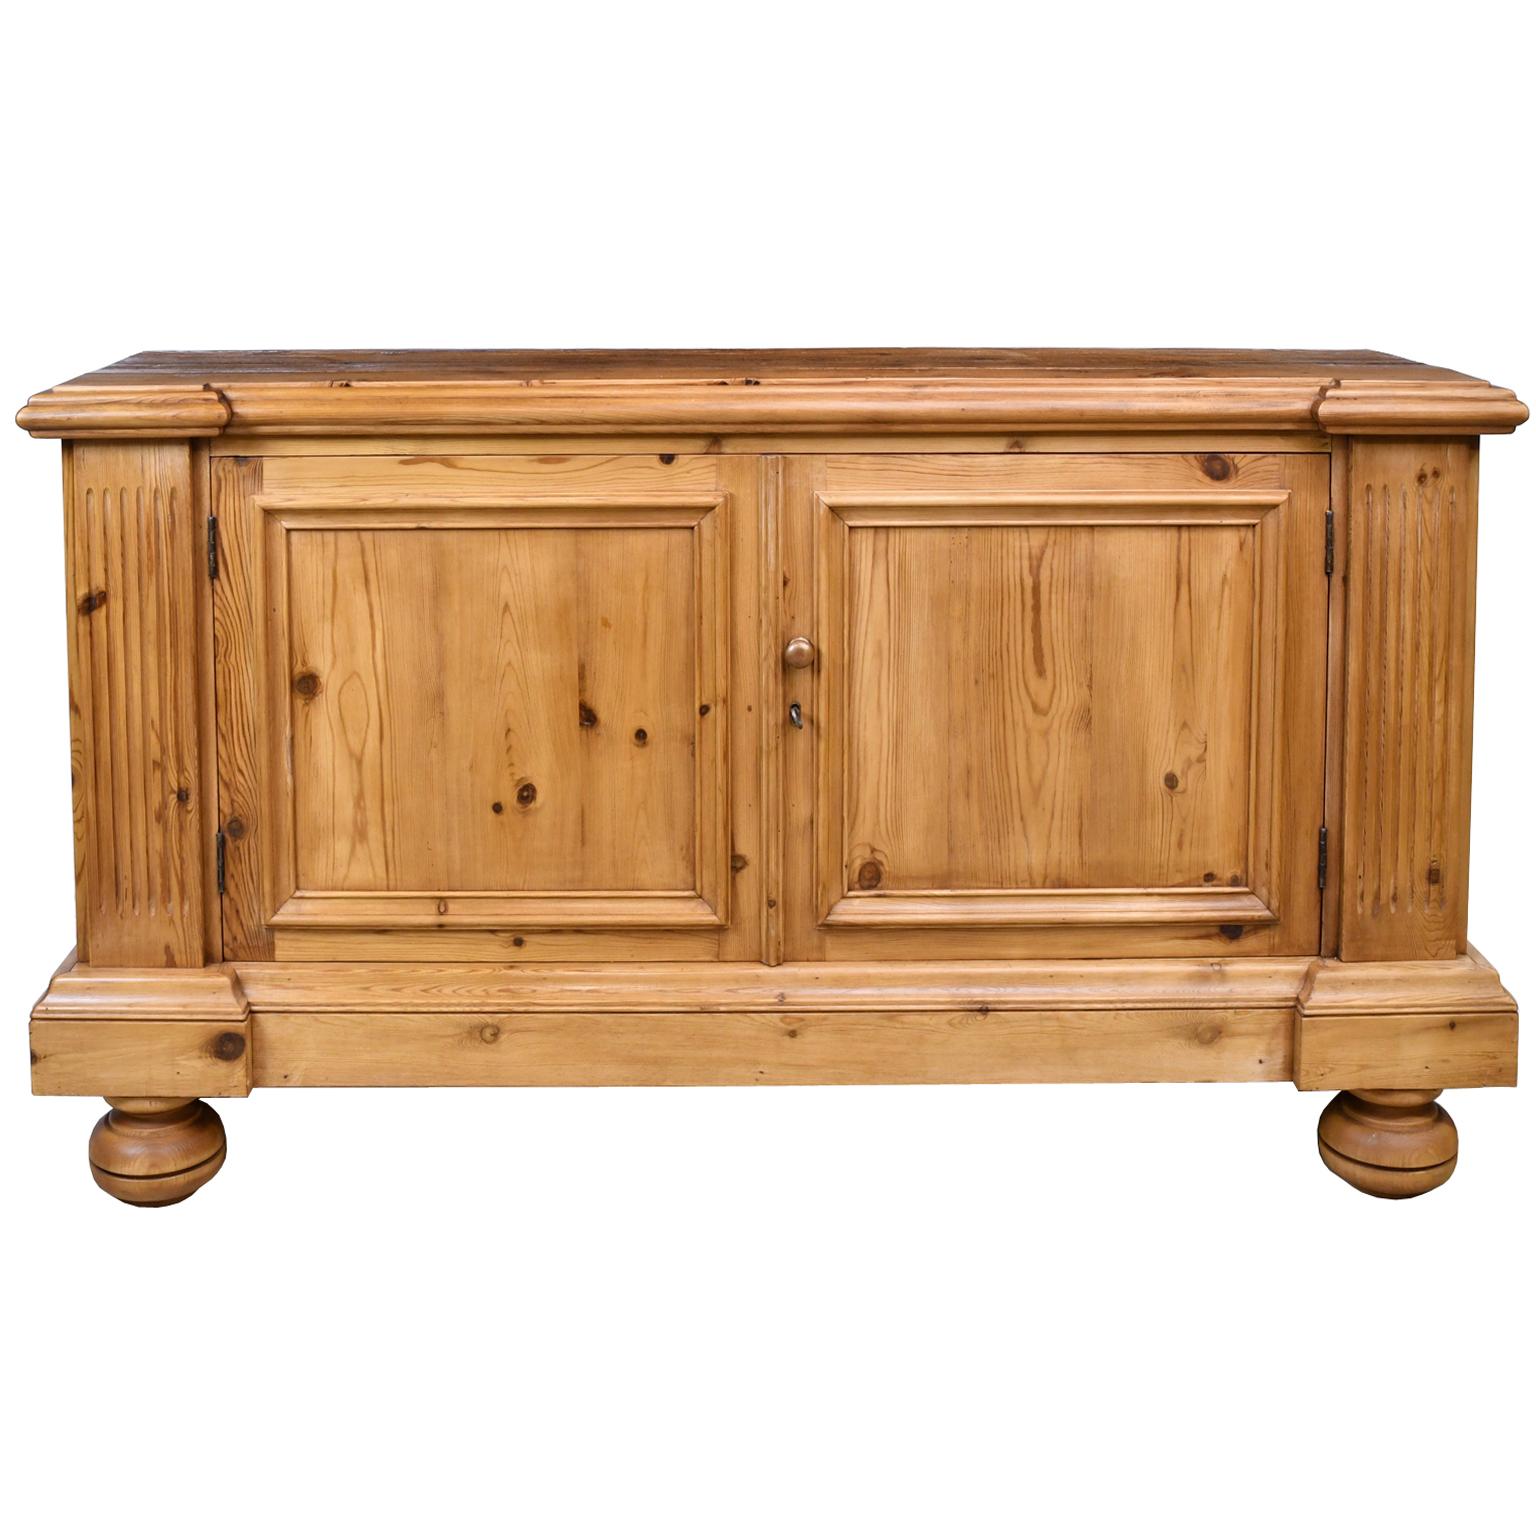 A sideboard or credenza in reclaimed antique European pine with fluted pilasters flanking two cabinet doors with recessed panels that open to a storage space with a shelf. The sides also have a recessed panel. A classically-inspired, Bonnin Ashley